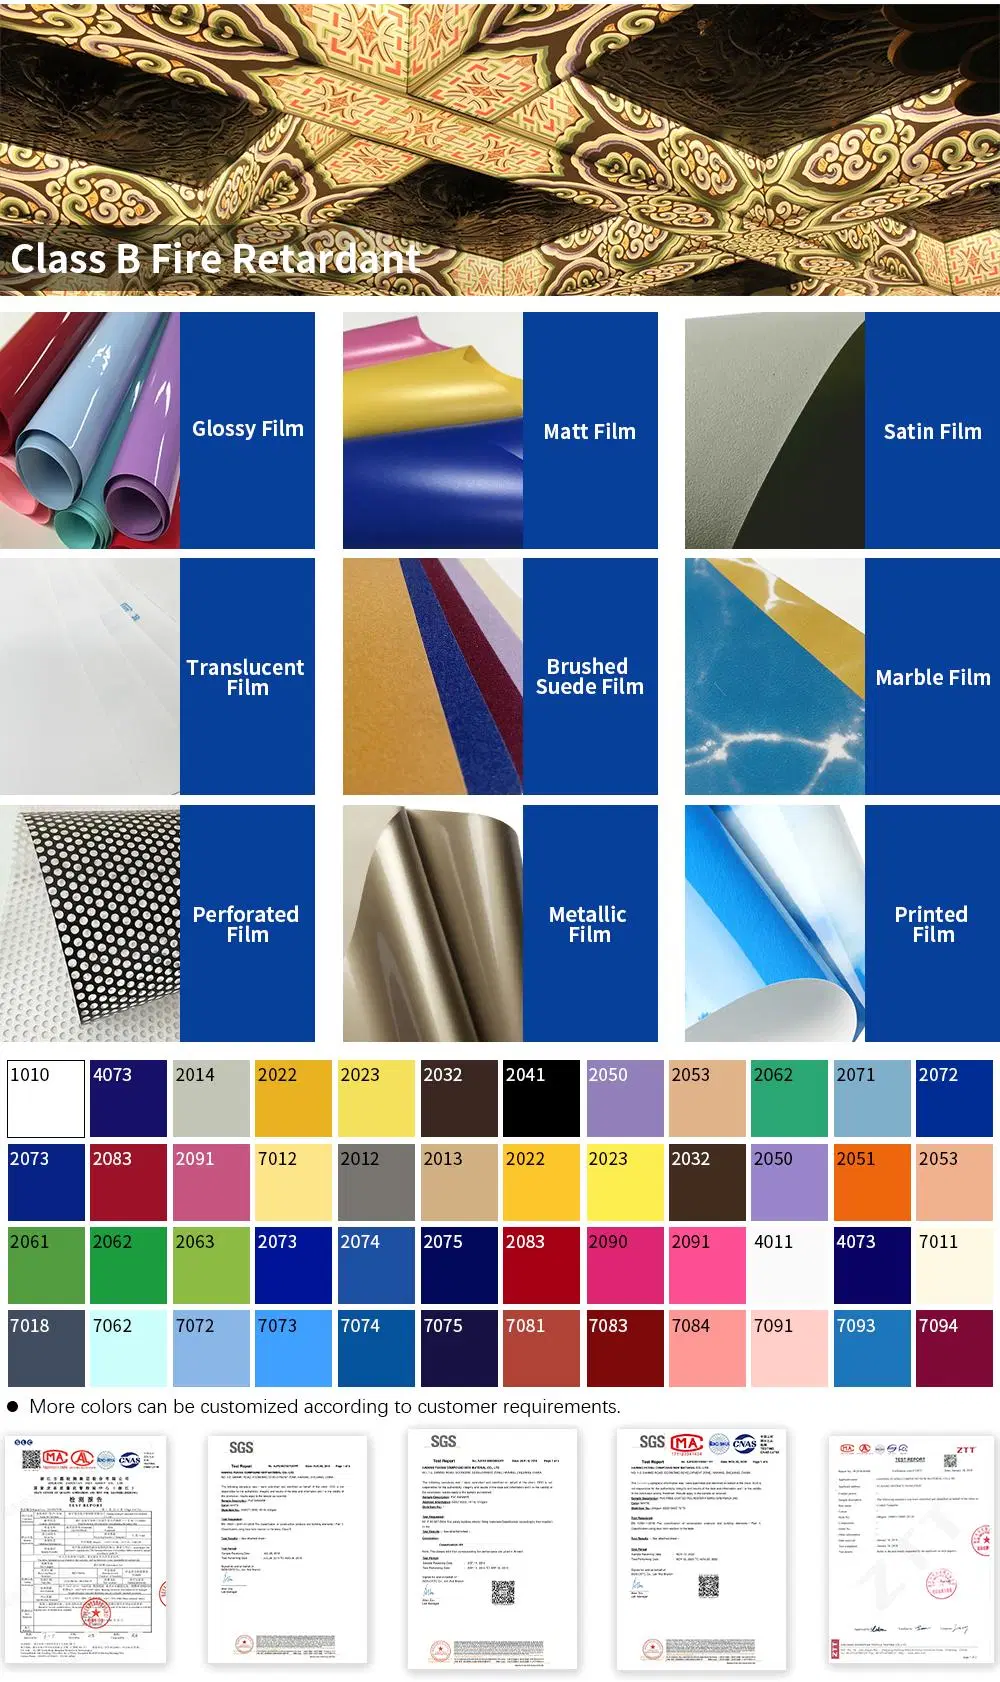 China Supplier New Wide Variety of Applications China PVC Ceiling Film